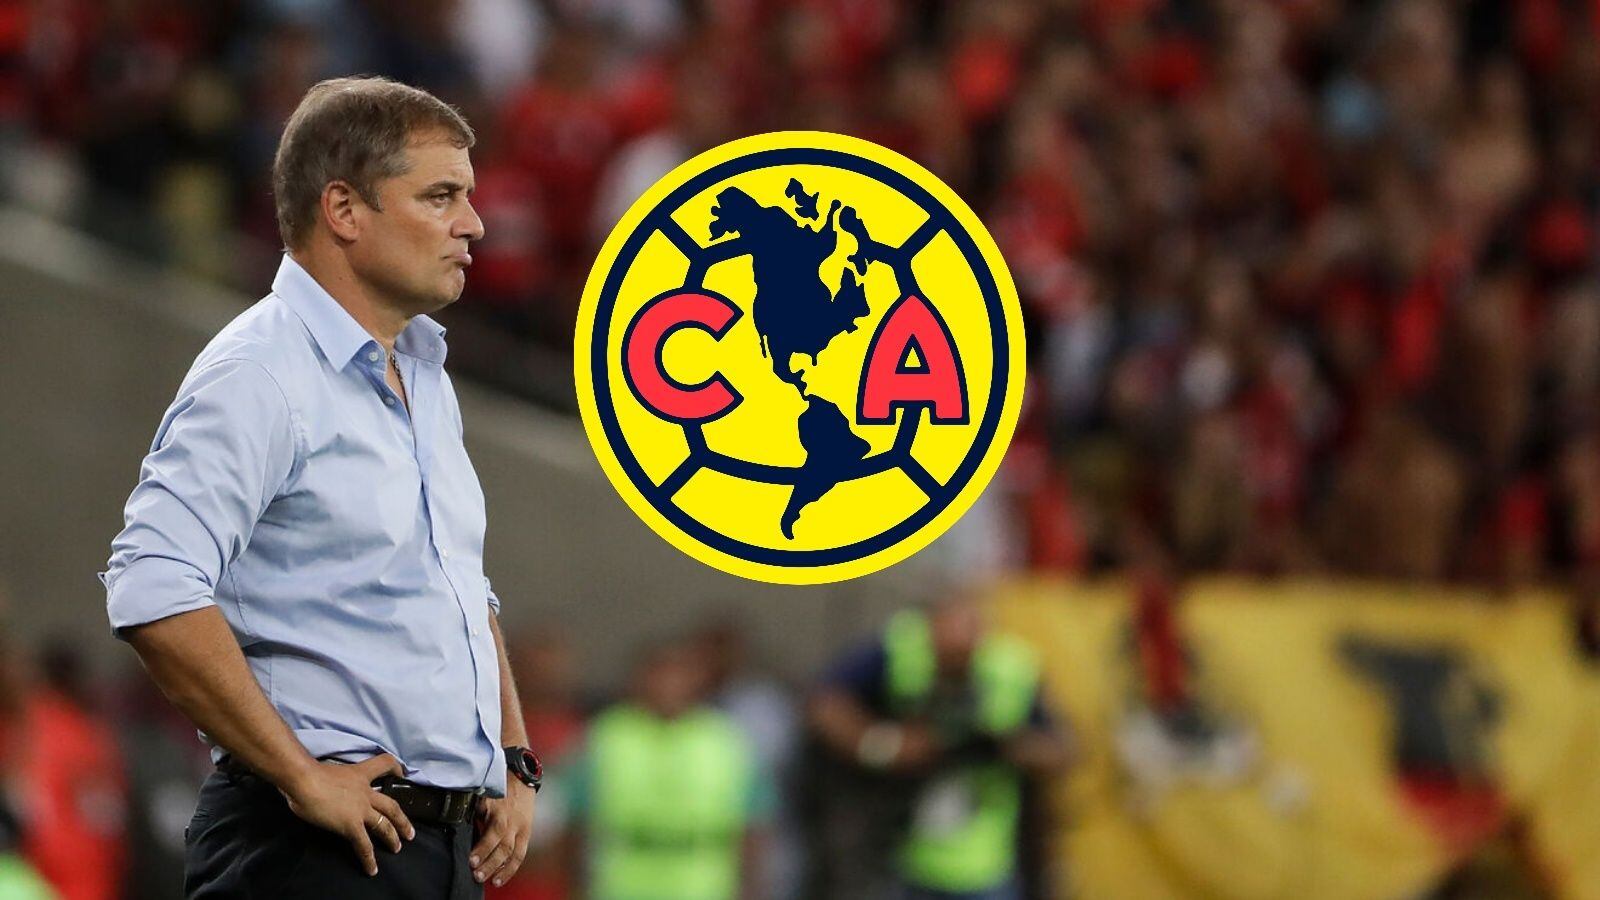 Won a title with Club America, said yes to Cruz Azul and would replace Aguirre